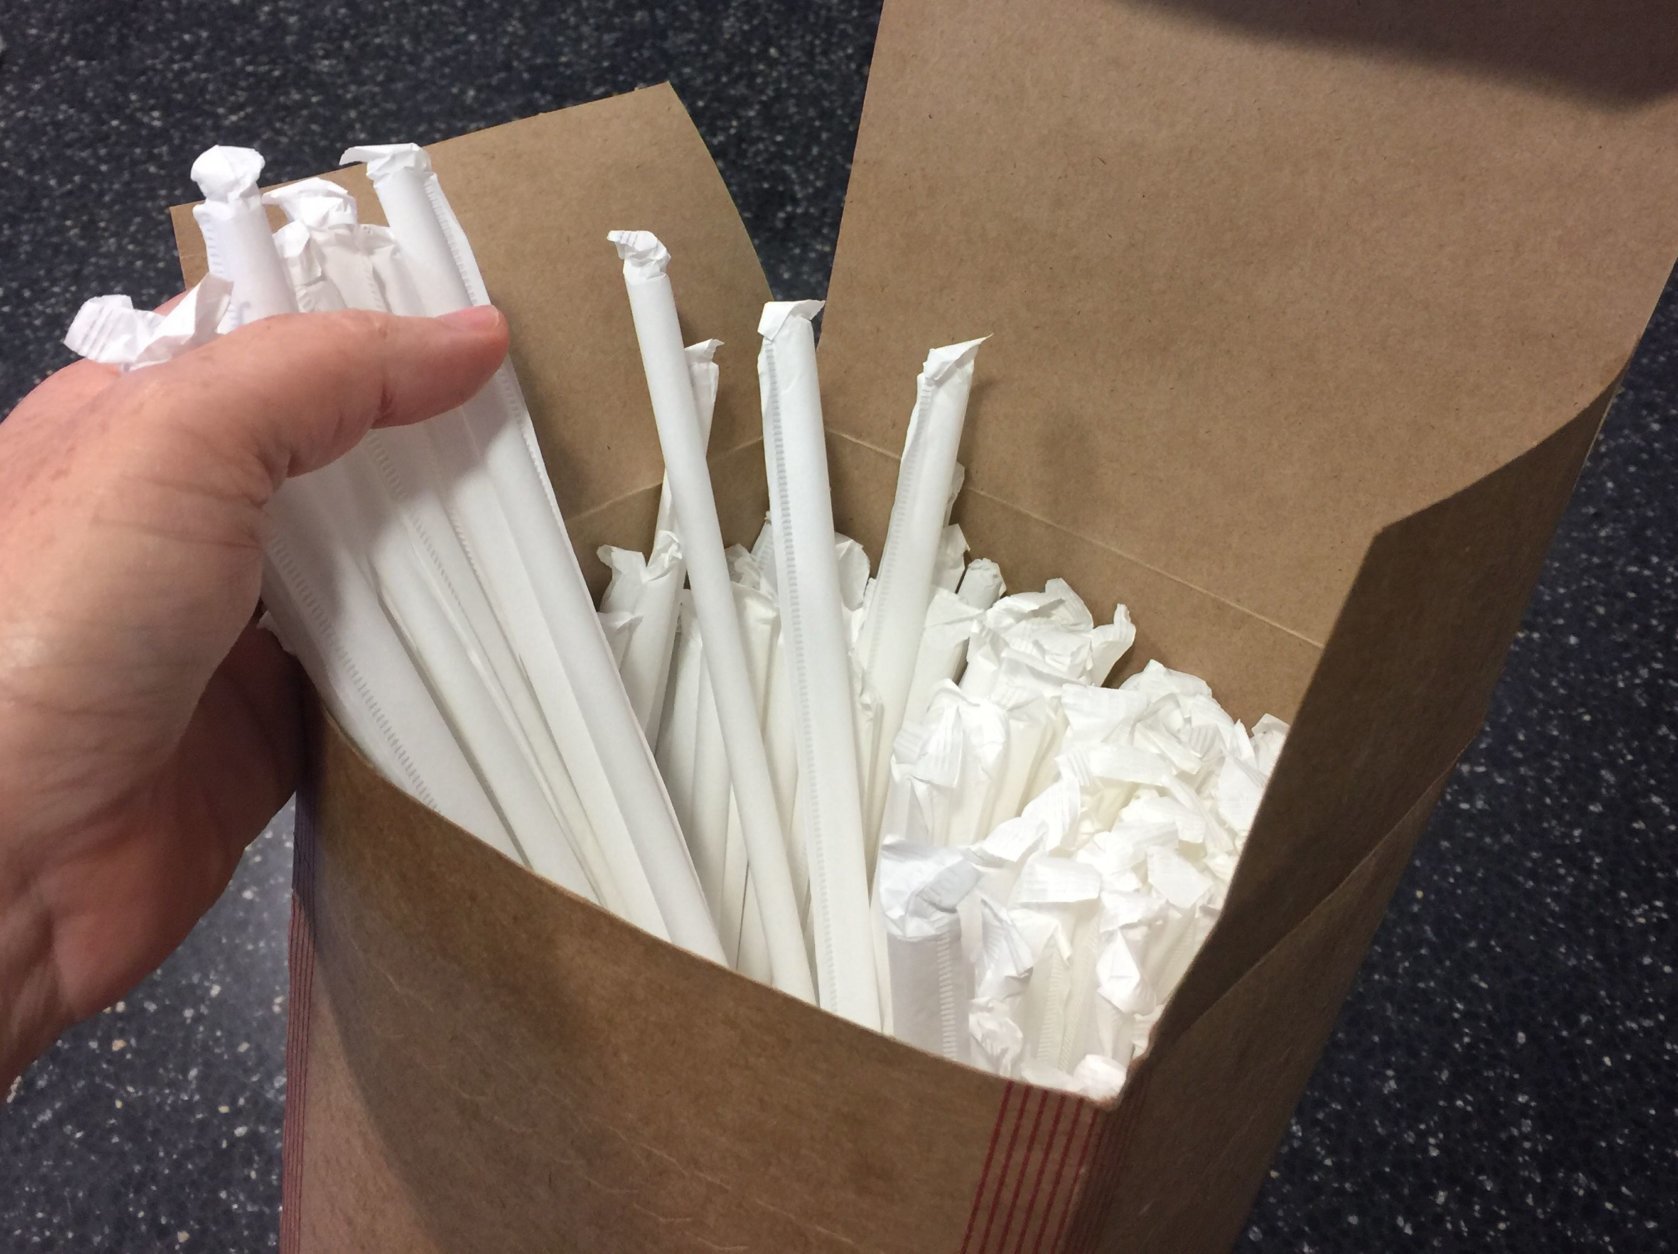 These straws are used at a local burger joint for its milkshakes. (WTOP/Kristi King)